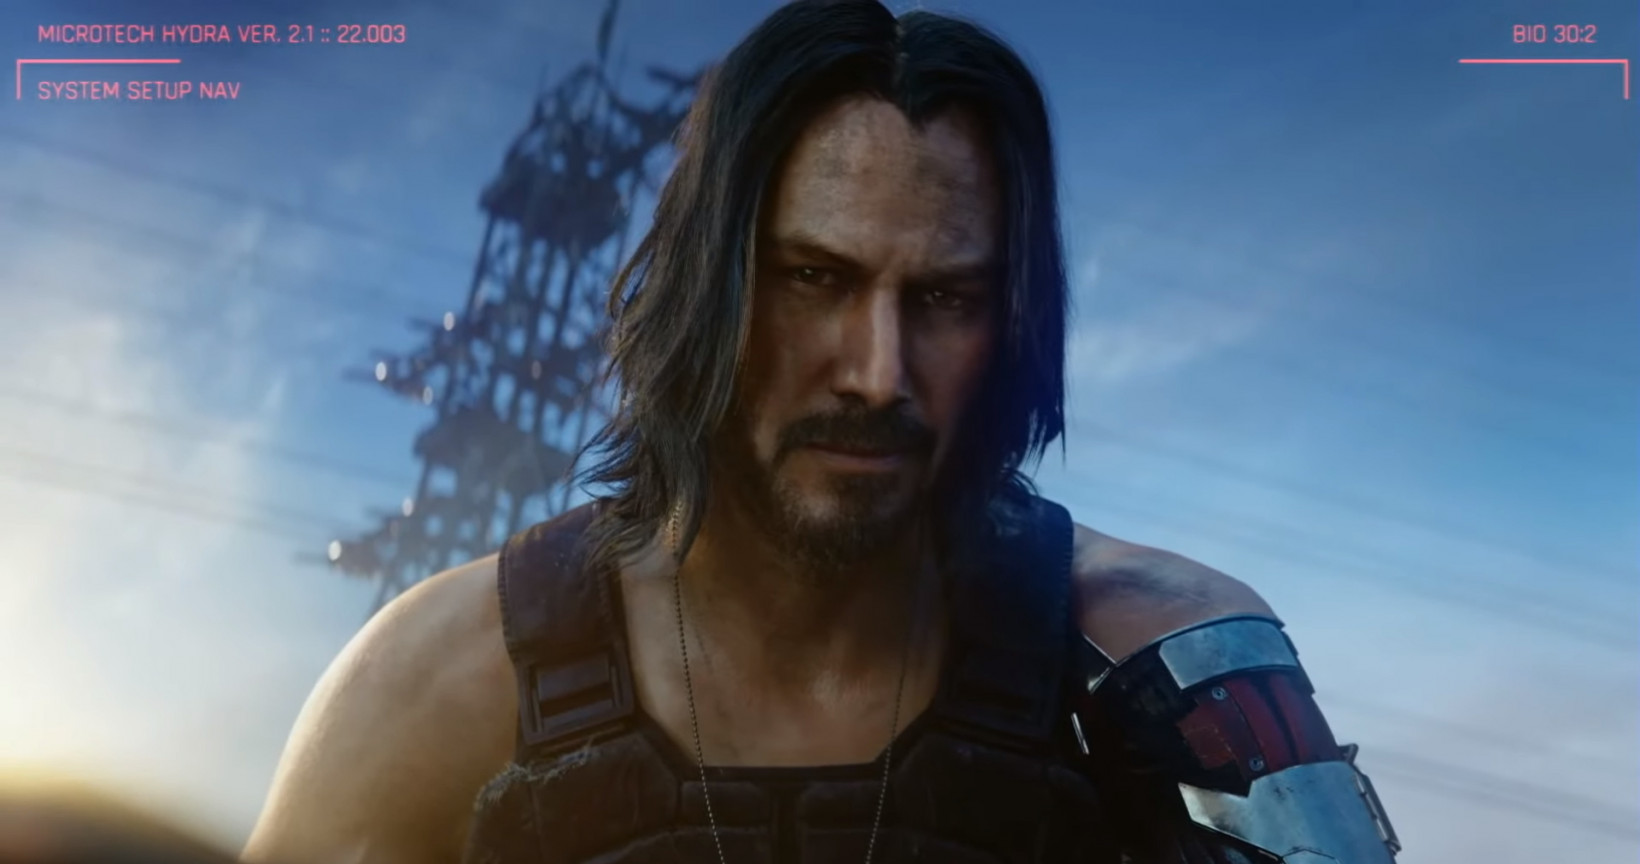 Cyberpunk 2077 Developer Defends Cut Content and Says "Don't Worry" About Amount of Content